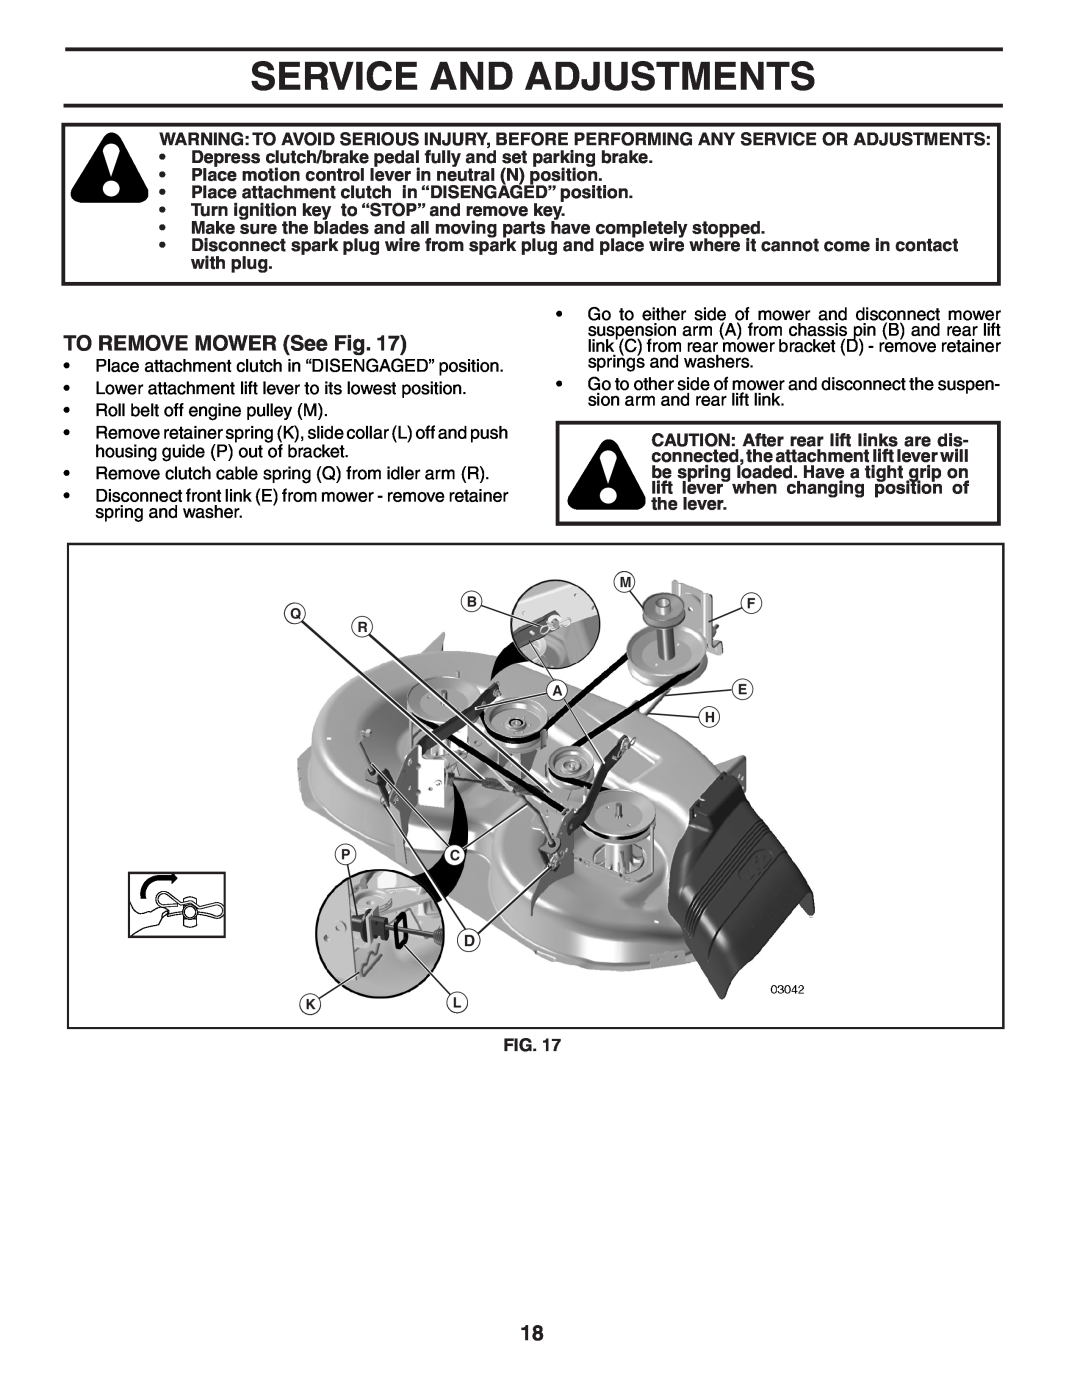 Poulan 402938, 96042000800 manual Service And Adjustments, TO REMOVE MOWER See Fig 